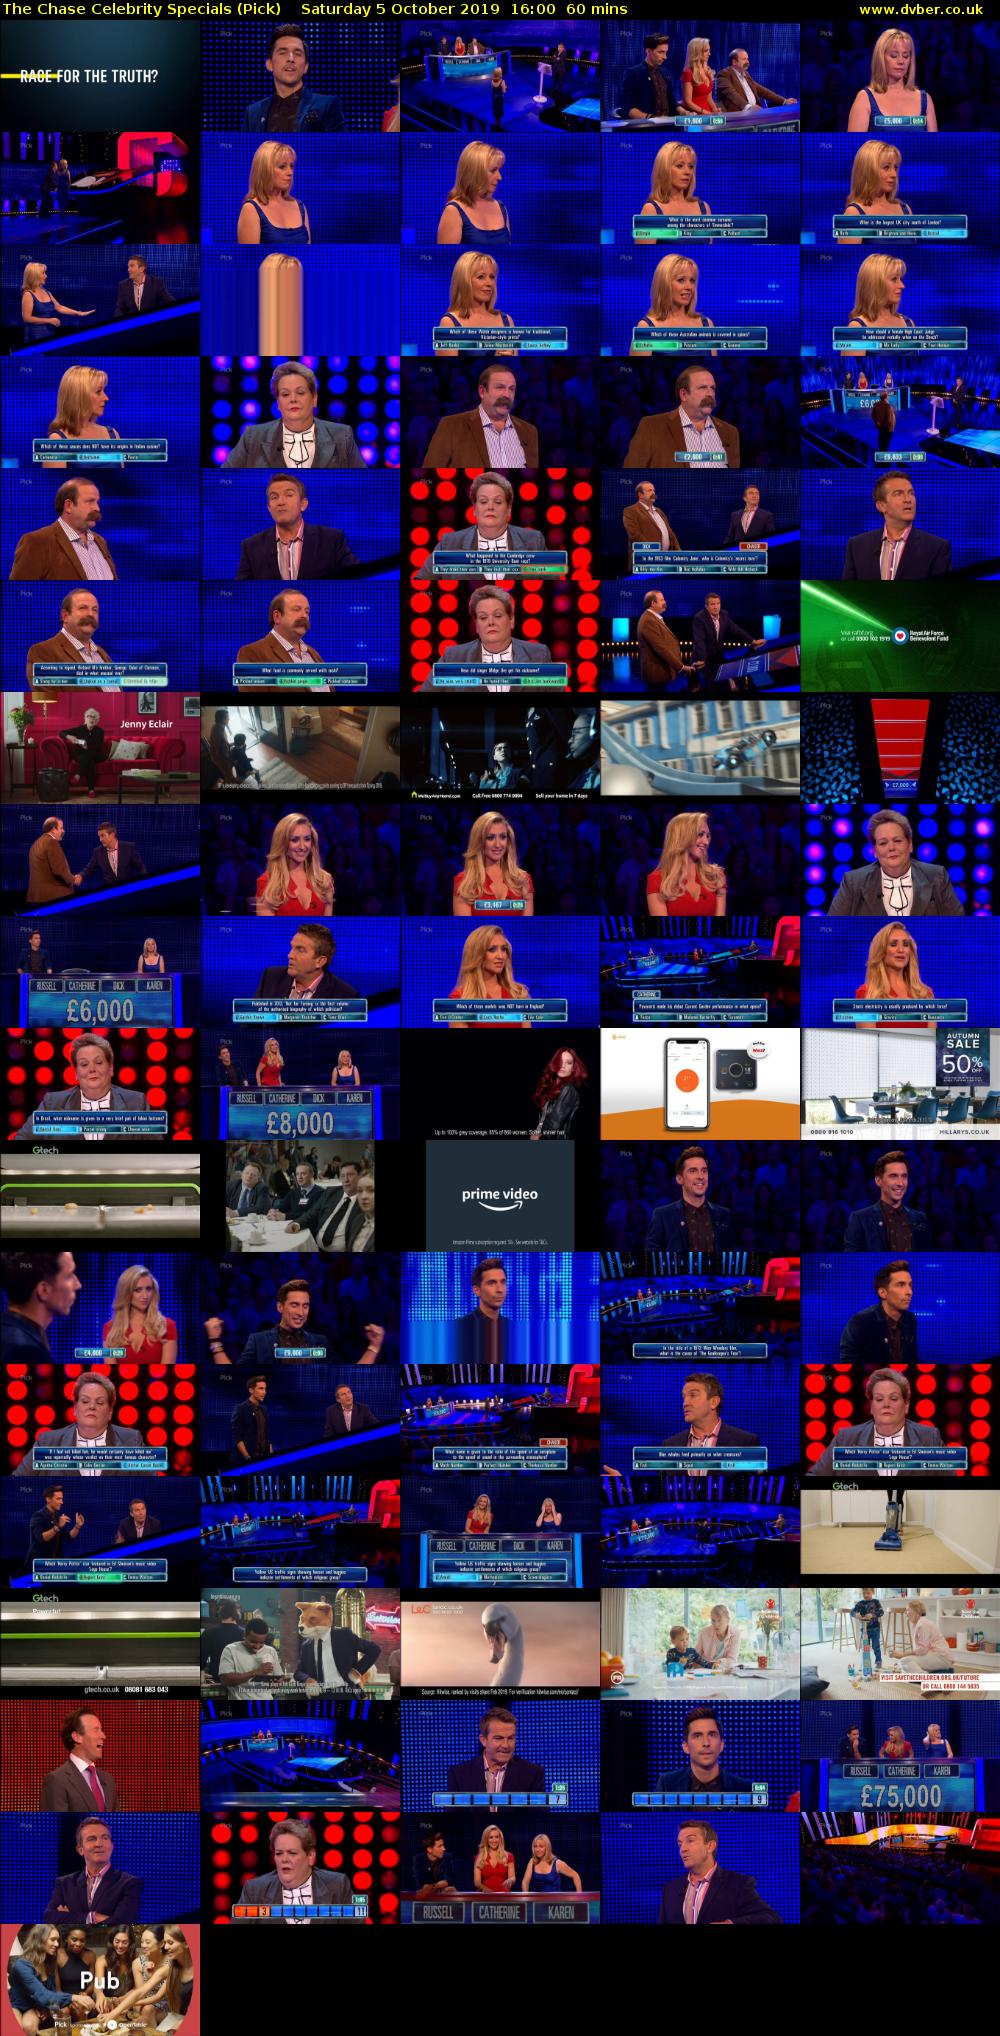 The Chase Celebrity Specials (Pick) Saturday 5 October 2019 16:00 - 17:00